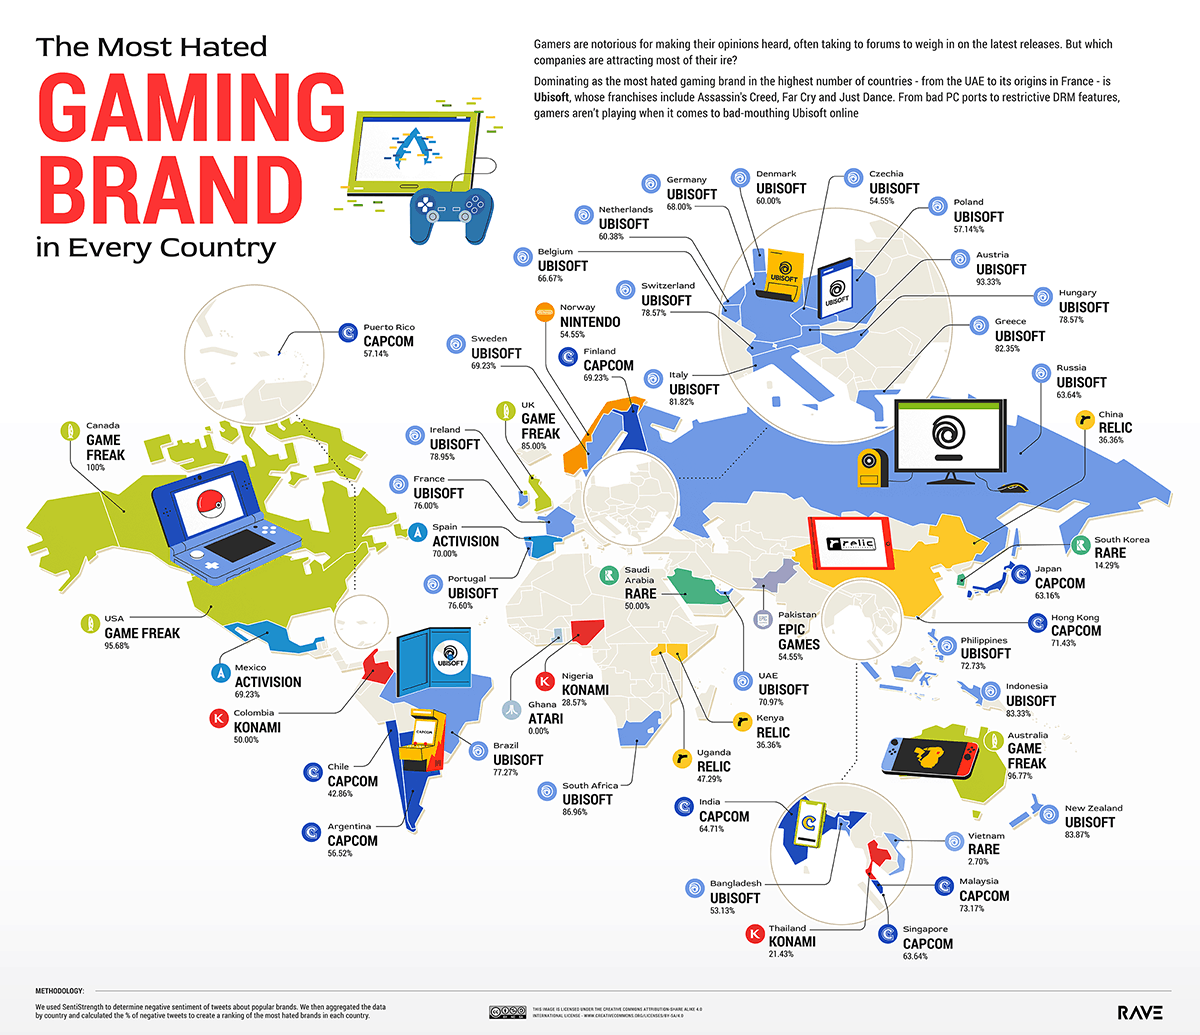 02_The-Most-Hated-Brands_World-Map_Gamin